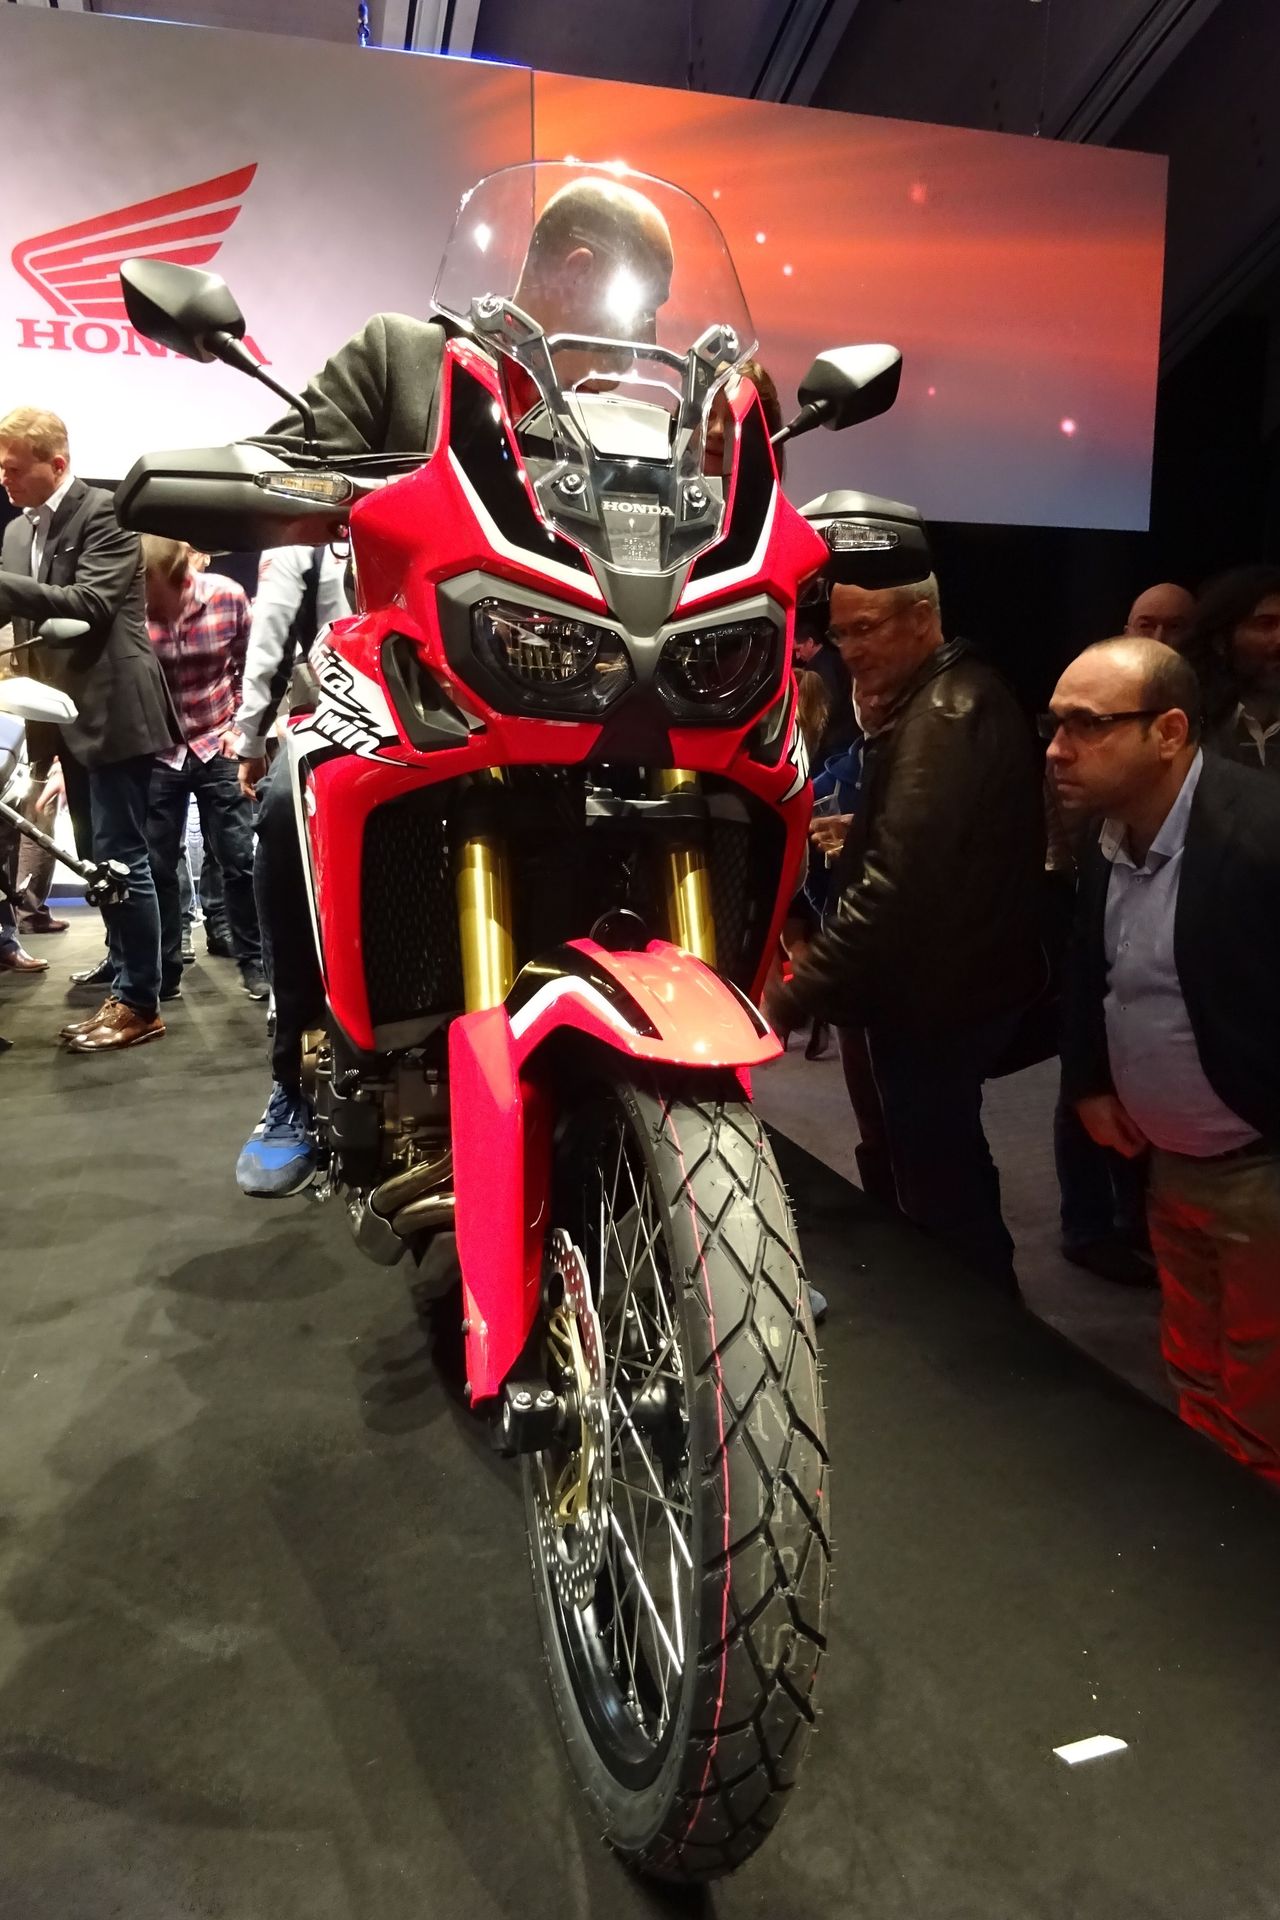 Honda officially launched the Africa Twin at EICMA 2015